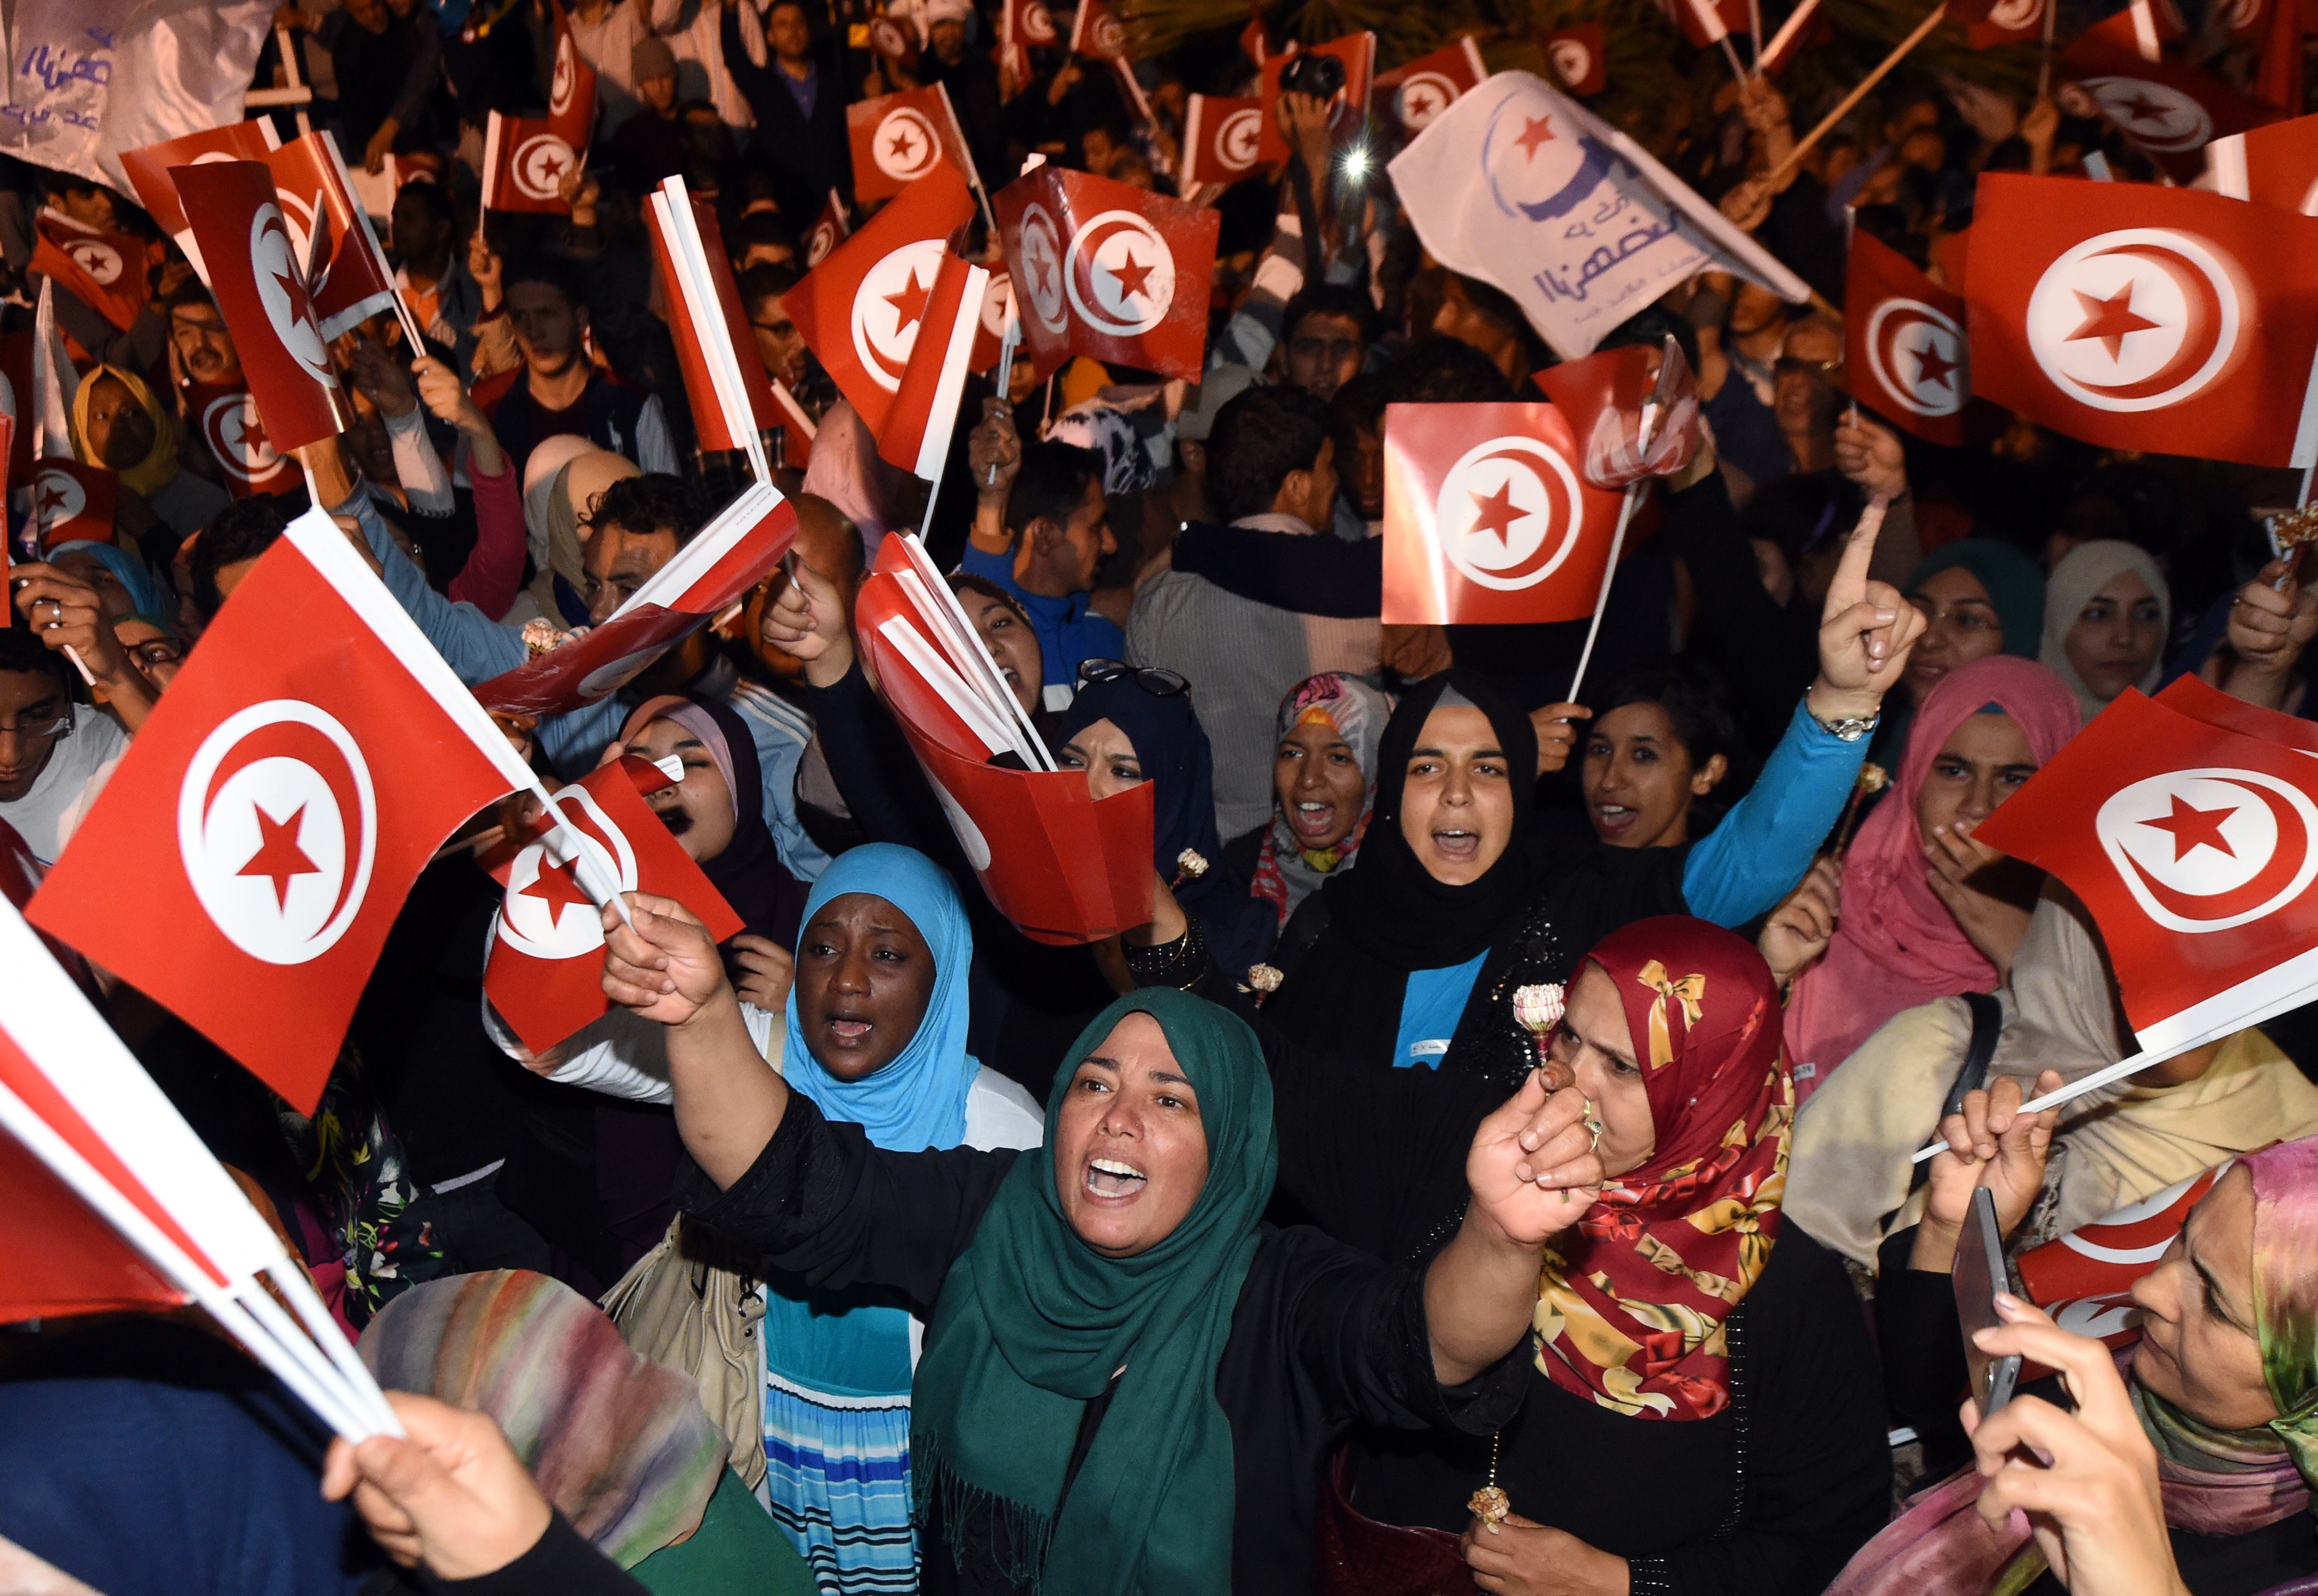 Tunisian Ennadha Party supporters wave flags as they wait for the party's leader to give a speech on October 27, 2014 in Tunis following the legislative election. The leader of Tunisia's Islamist Ennahda party congratulated his secular rival on October 26 for &quot;his party's win&quot; in a general election seen as critical for democracy in the cradle of the Arab Spring. The first parliamentary election since Tunisia's 2011 revolution pitted Ennahda against secular opponent Nidaa Tounes, with an array of leftist and Islamist groups also taking part. AFP PHOTO / FADEL SENNA        (Photo credit should read FADEL SENNA/AFP/Getty Images)